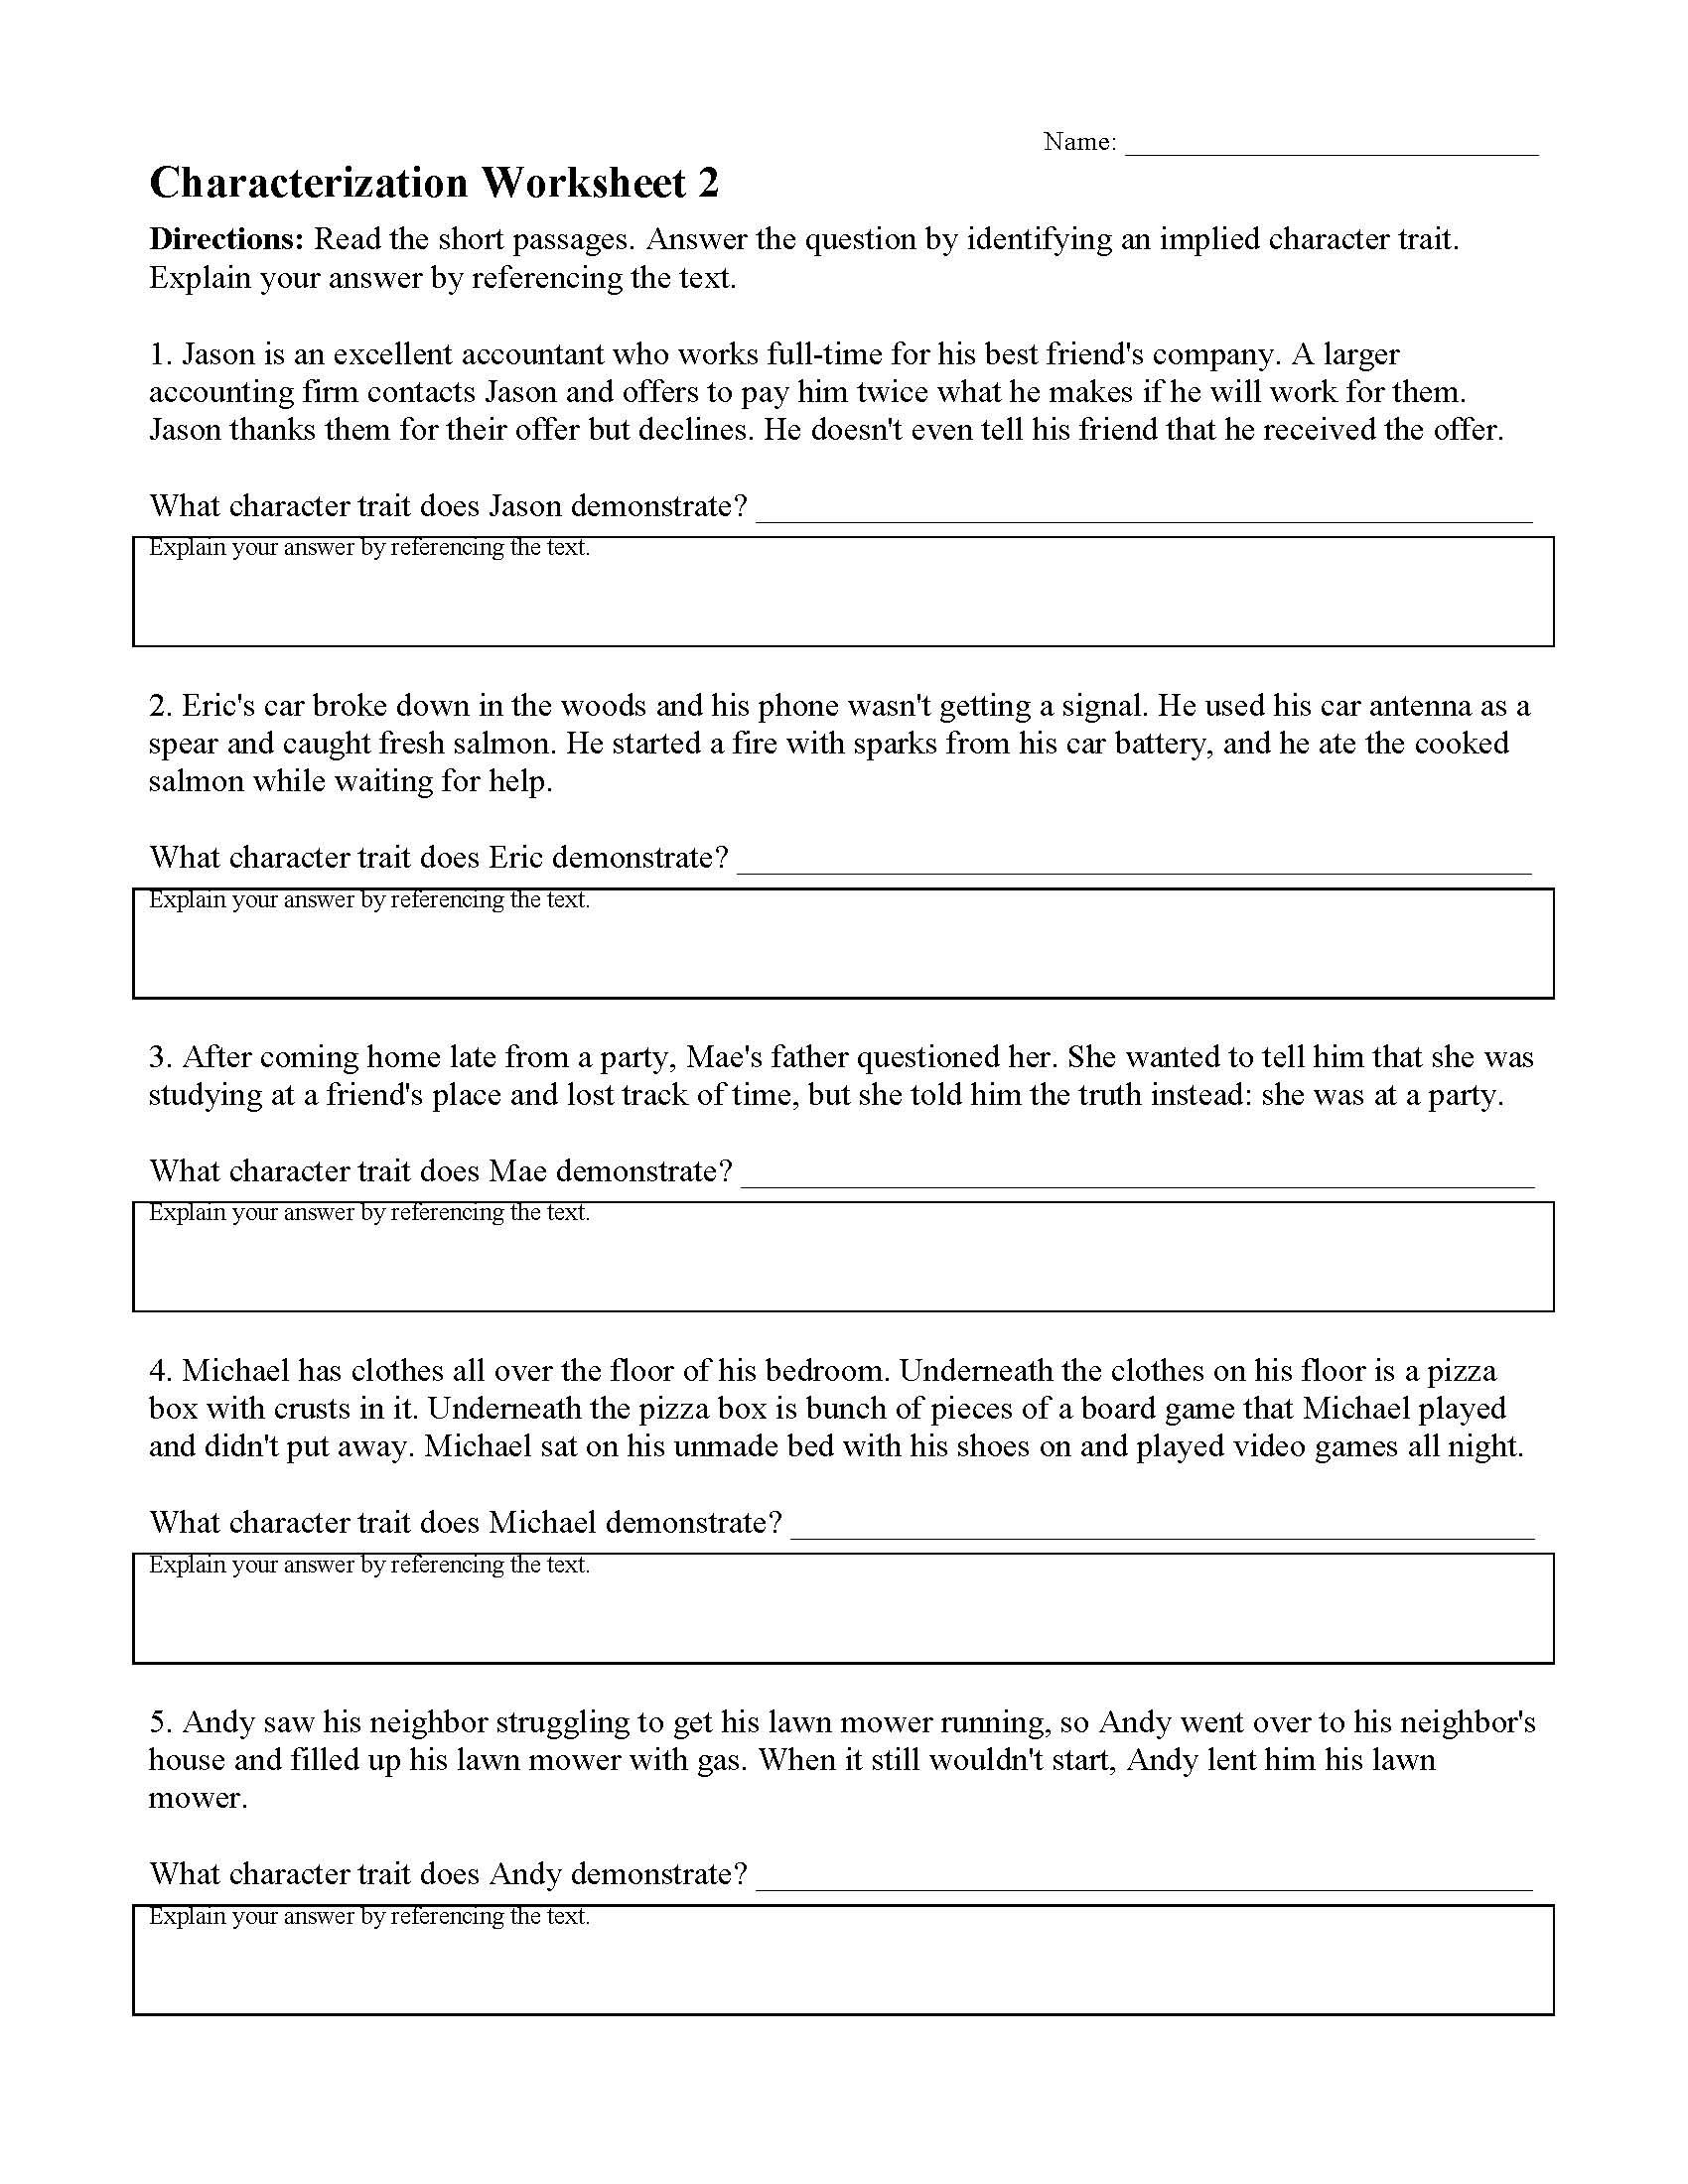 This is a preview image of Characterization Worksheet 2. Click on it to enlarge it or view the source file.